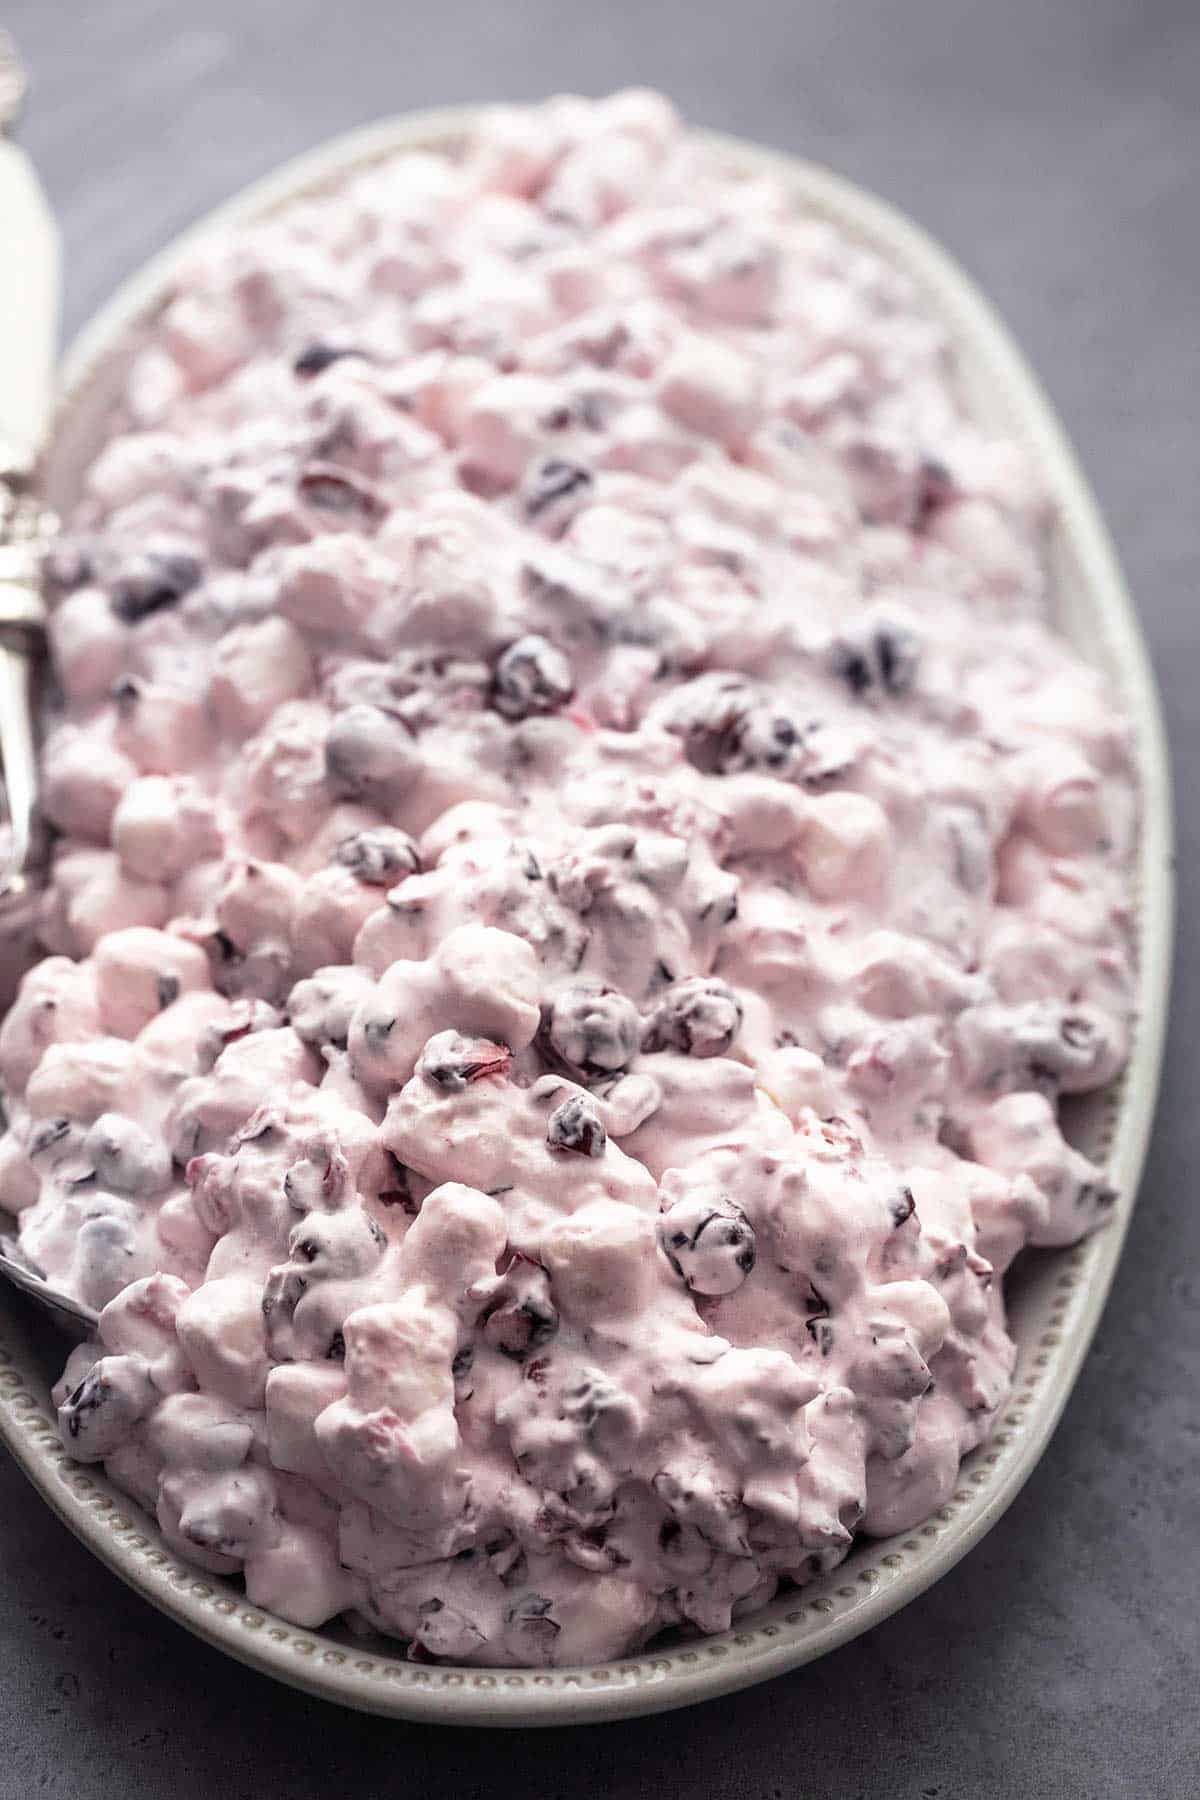 up close view of creamy marshmallow and berry mixture on a platter